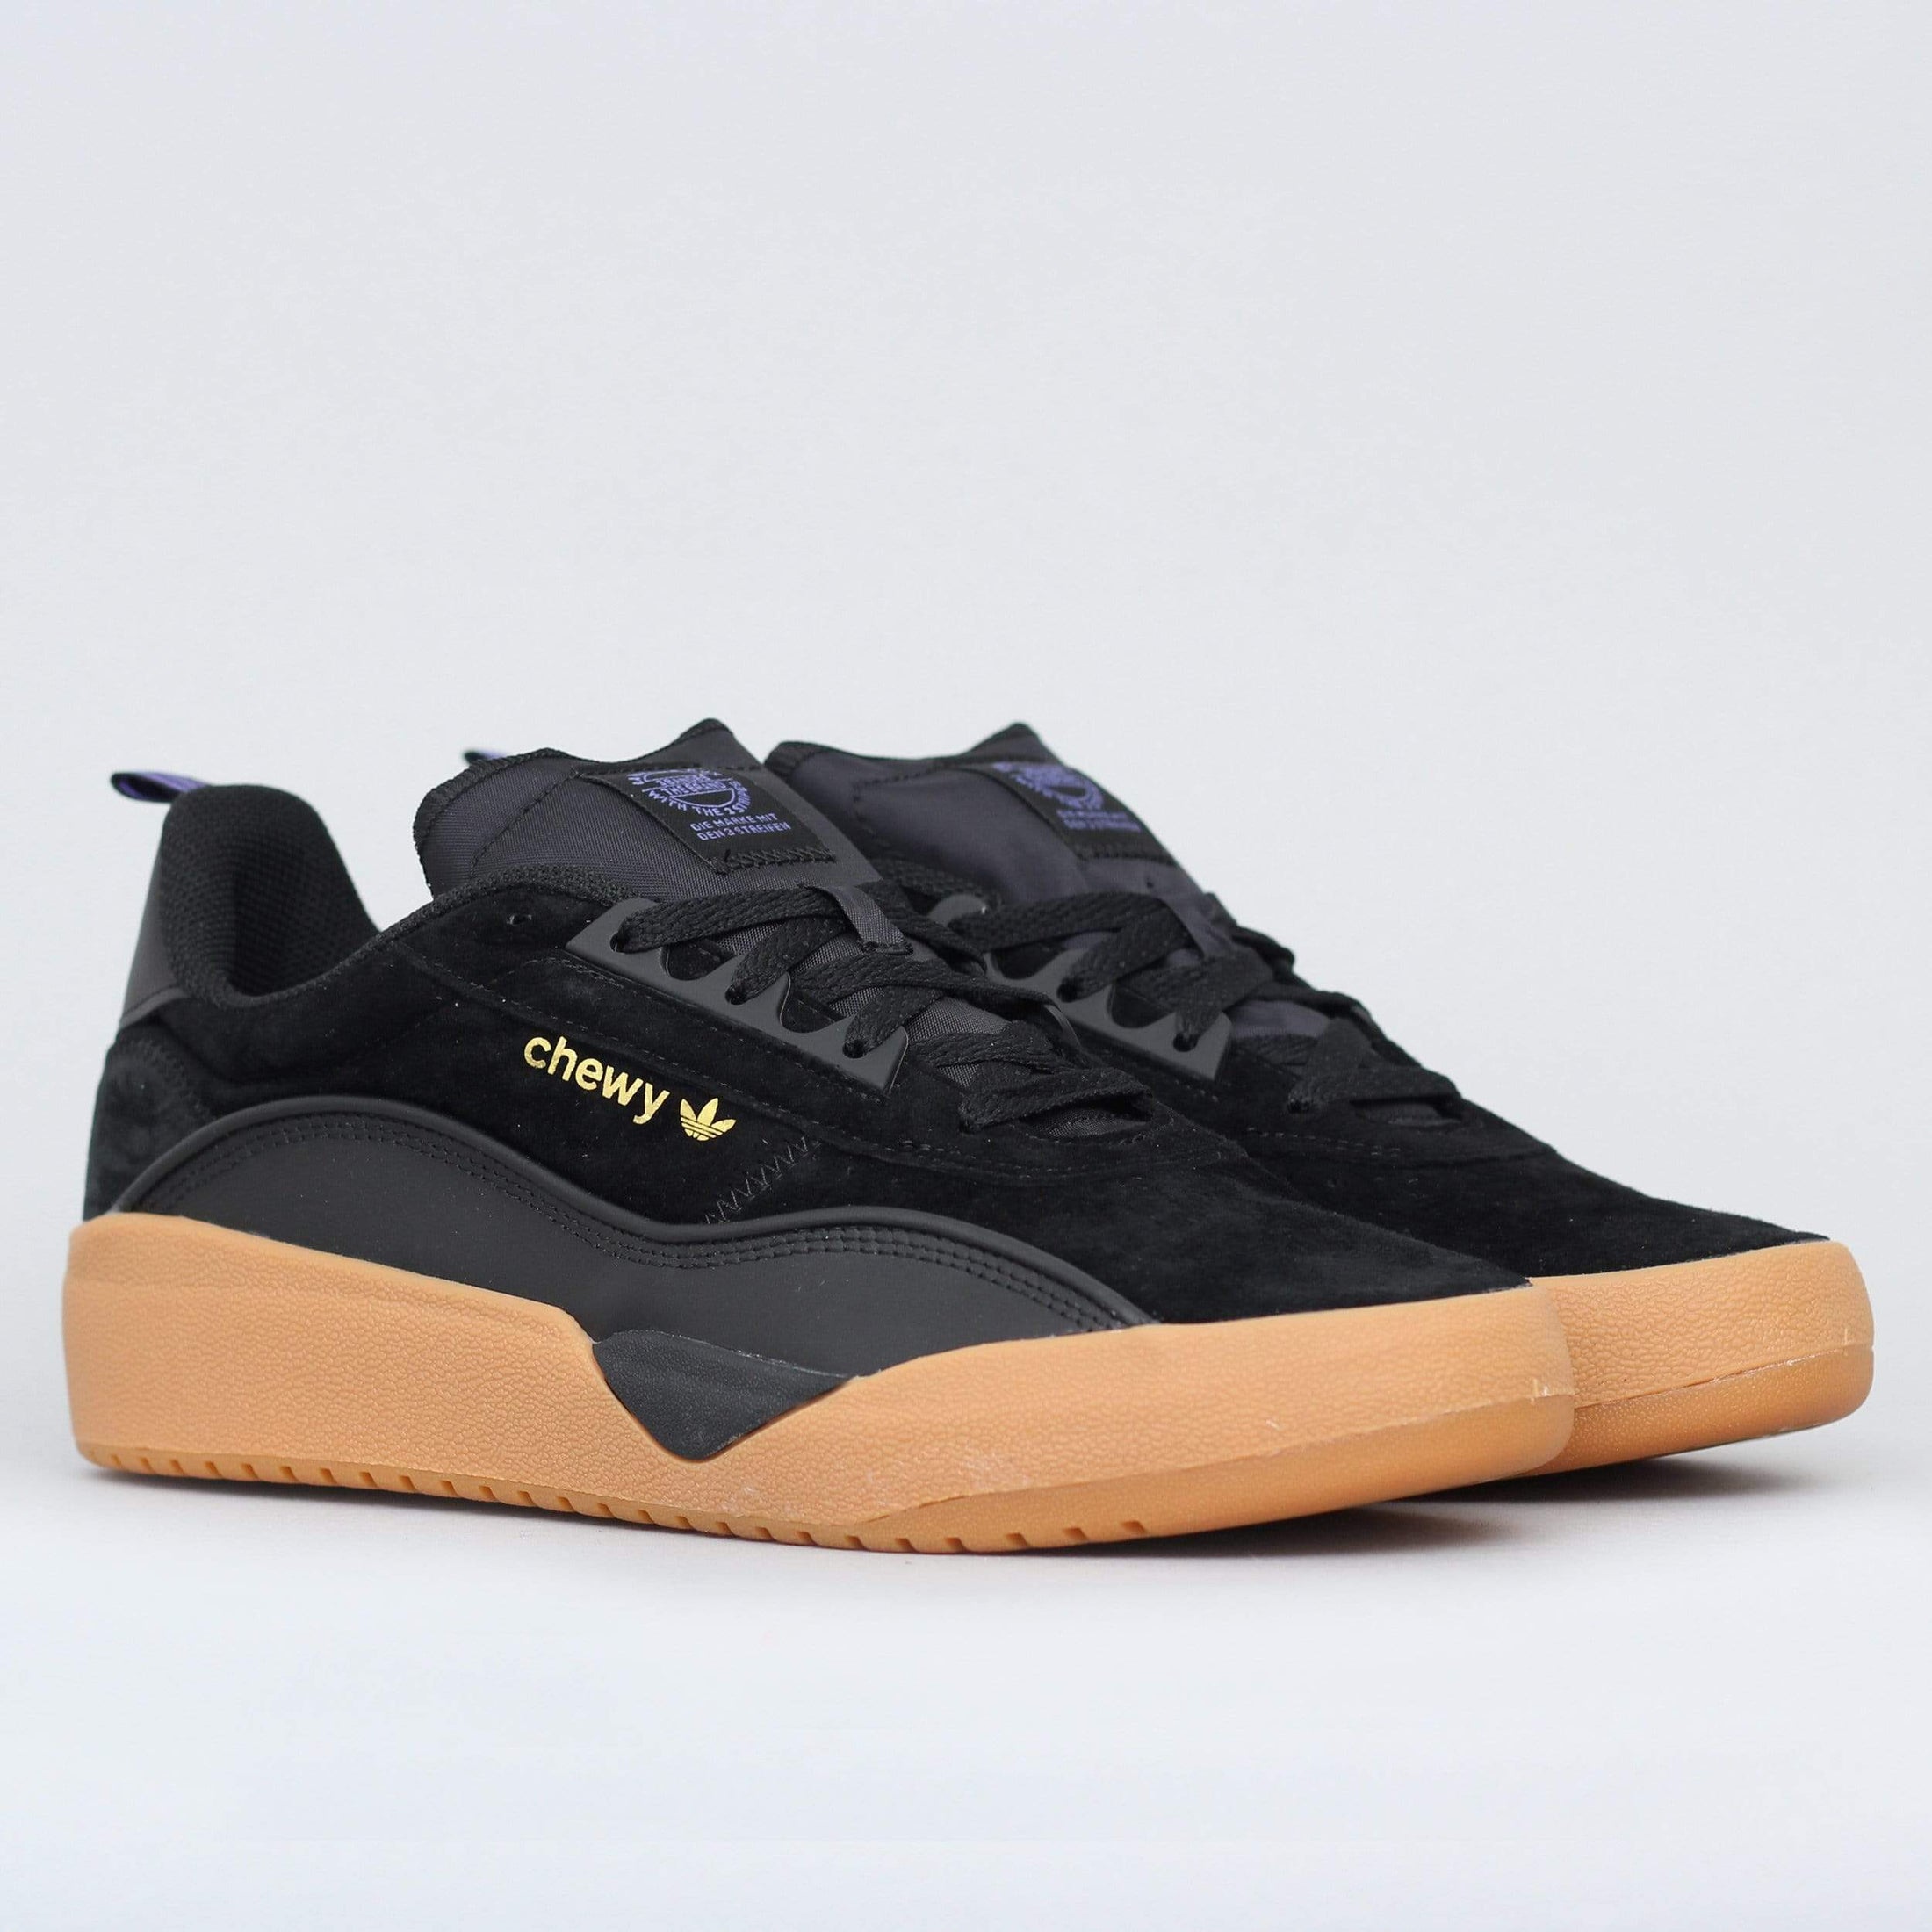 adidas Liberty Cup Chewy Cannon Shoe - Core Black / Gold Metallic / Gum 2